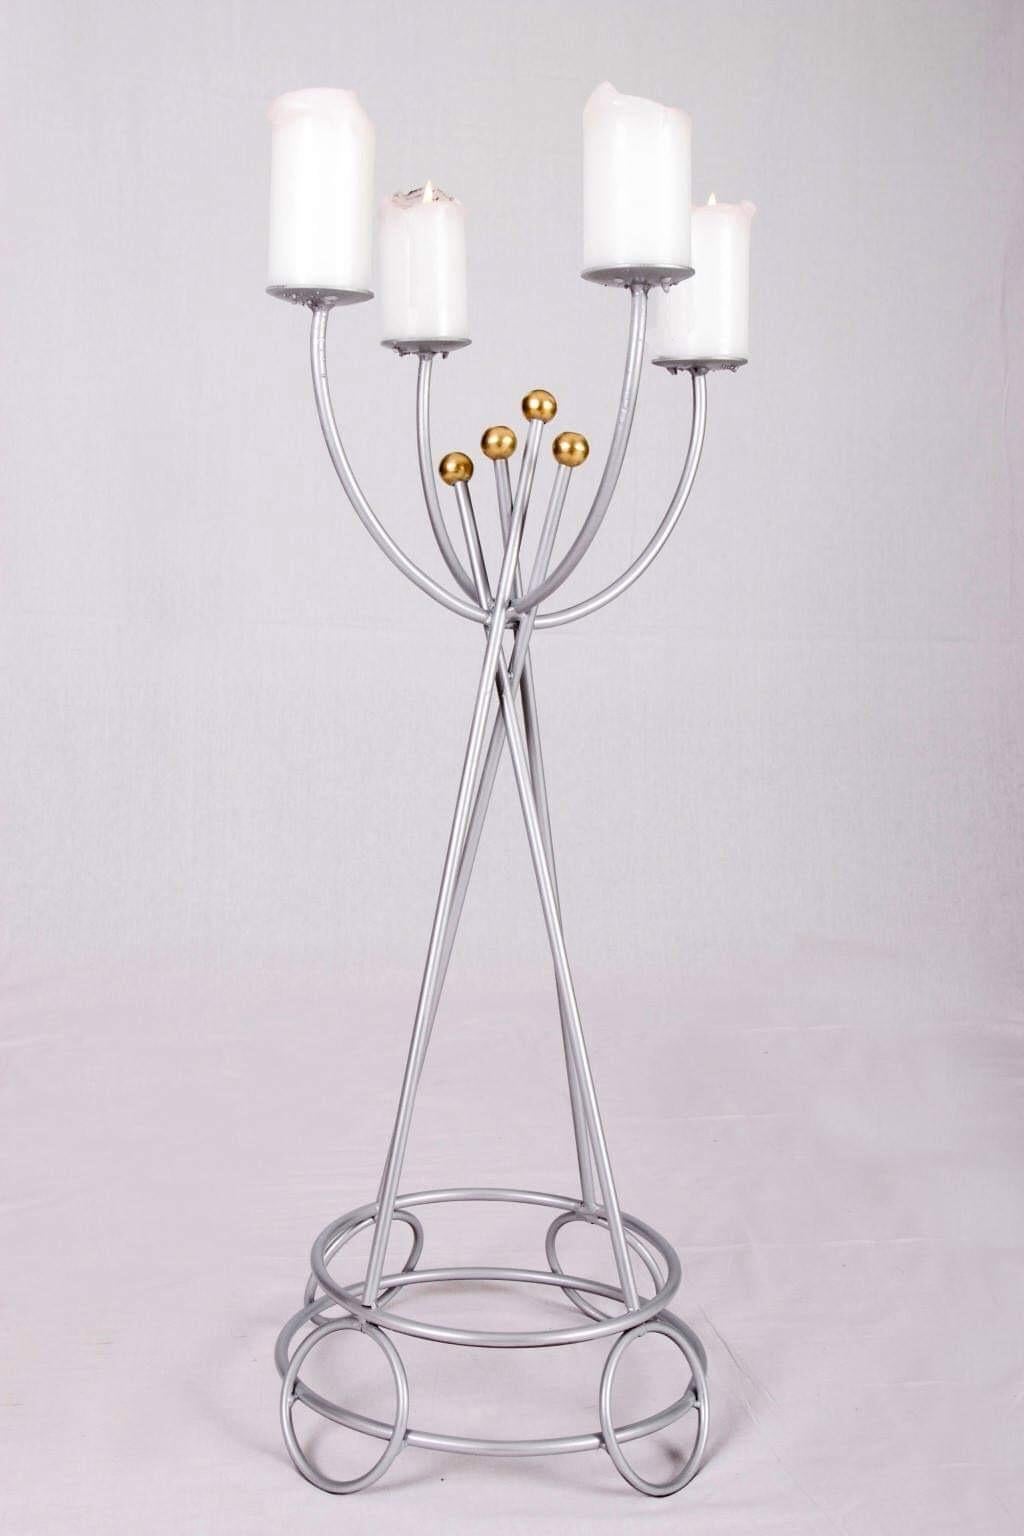 Art Deco Metal Candlestick with Gold-Plated Spheres In Good Condition For Sale In Gyermely, Komárom-Esztergom